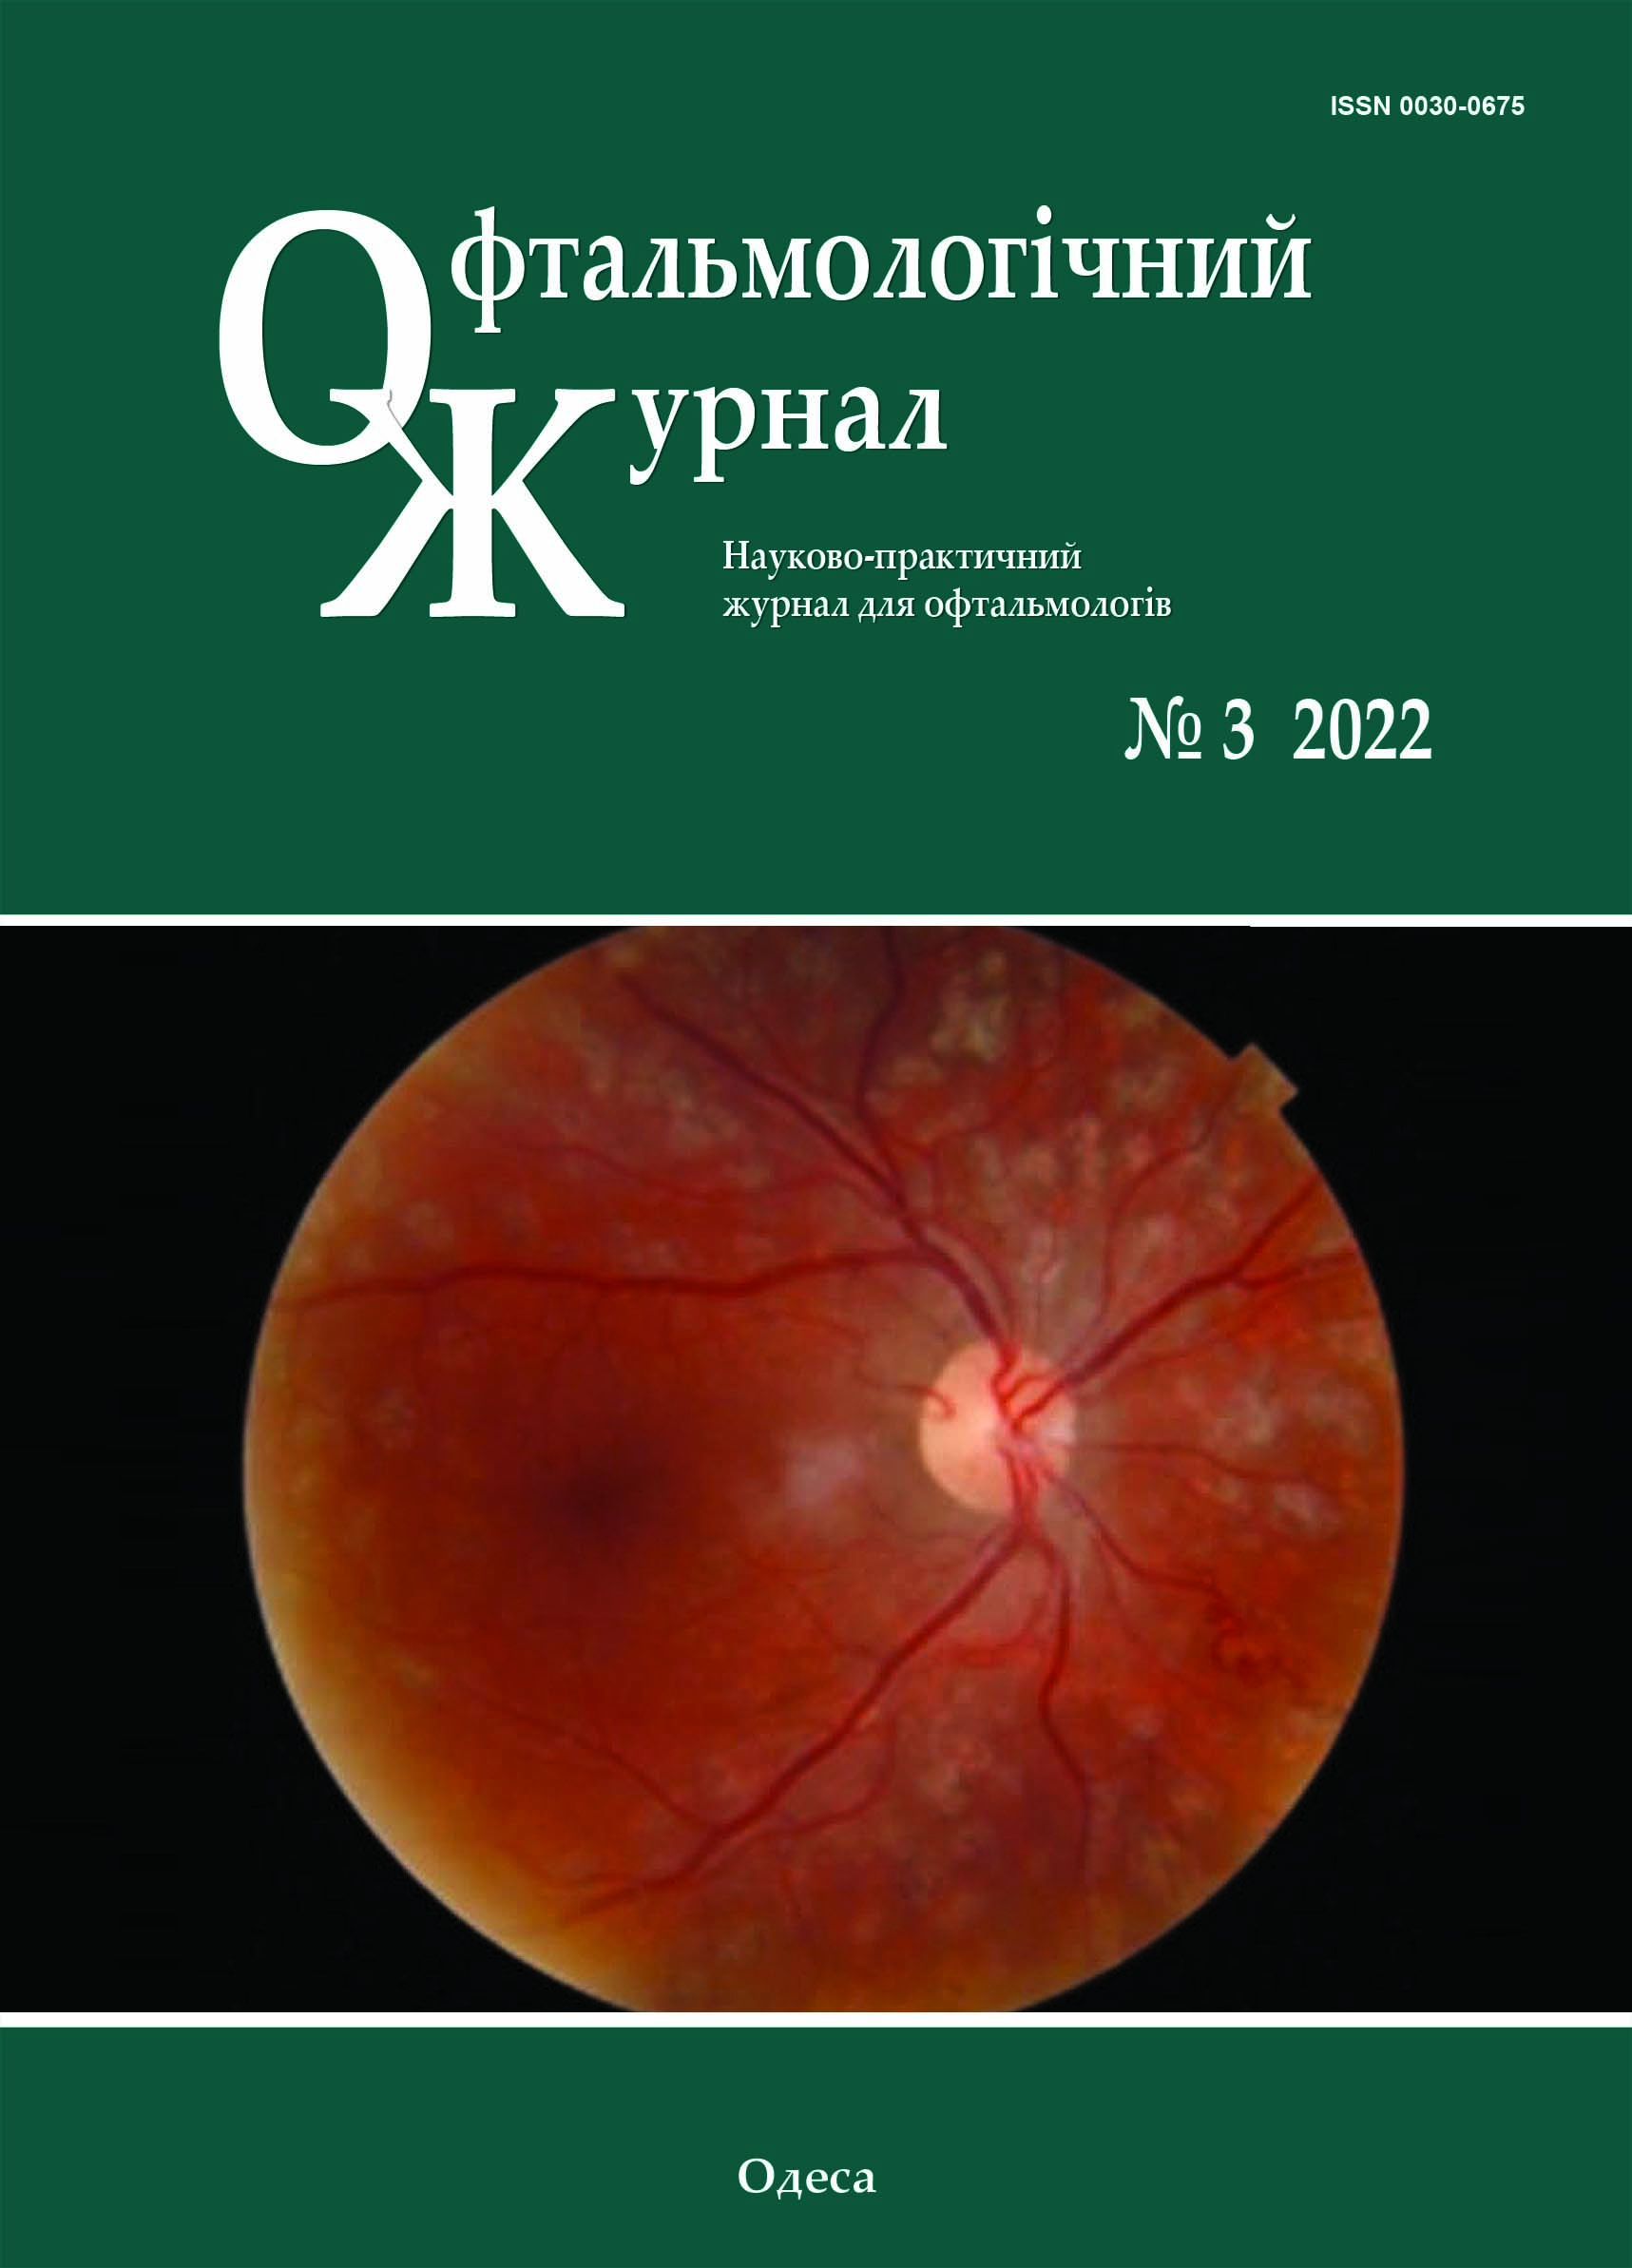 					View Vol. 506 No. 3 (2022): Journal of Ophthalmology (Ukraine)
				